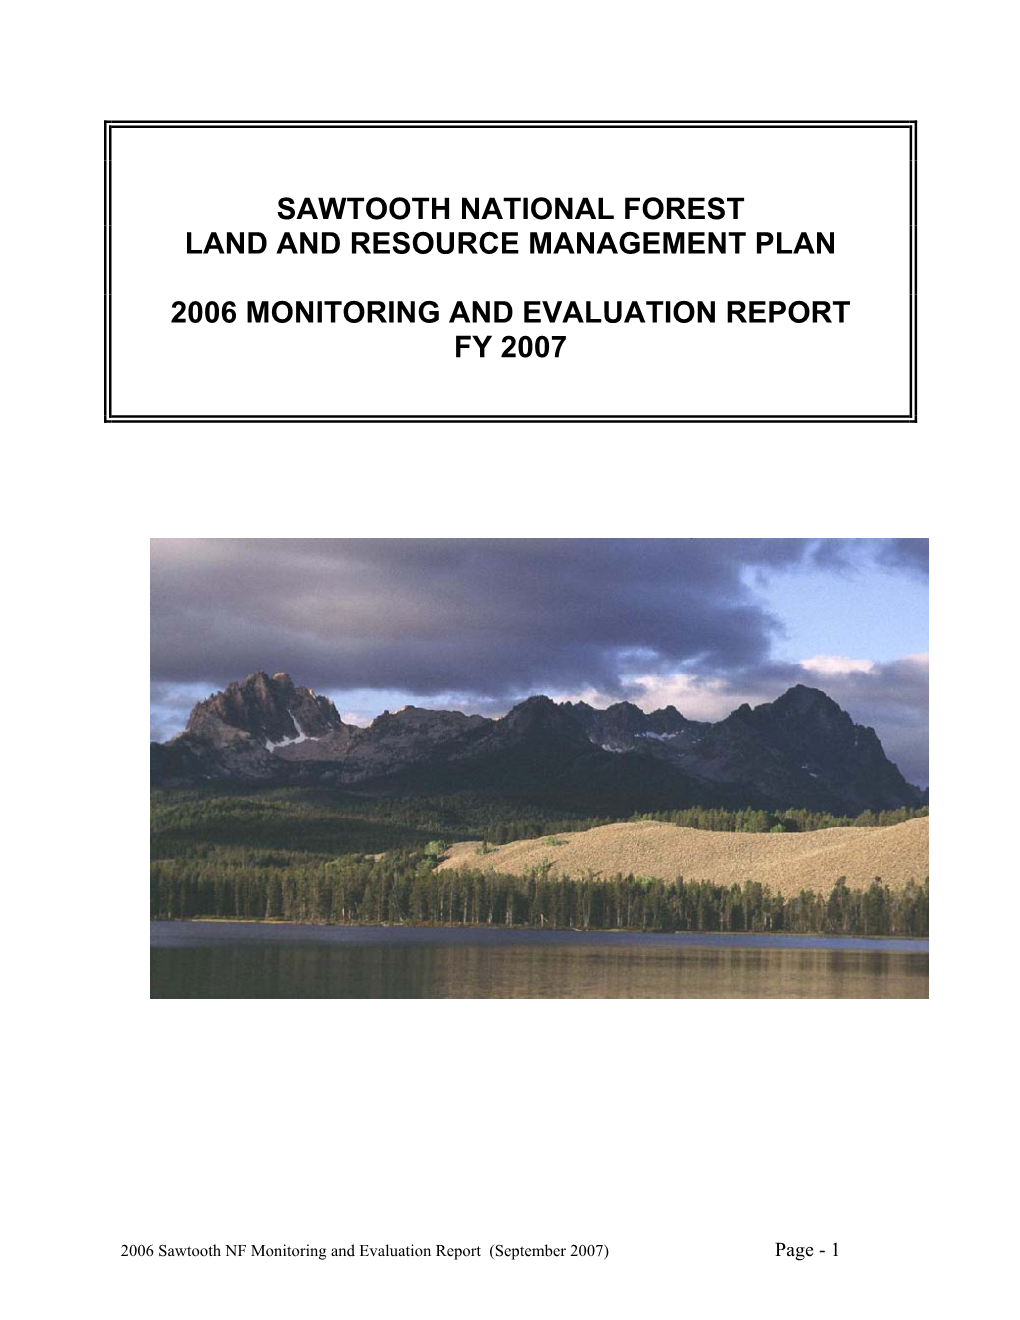 Sawtooth National Forest Land and Resource Management Plan